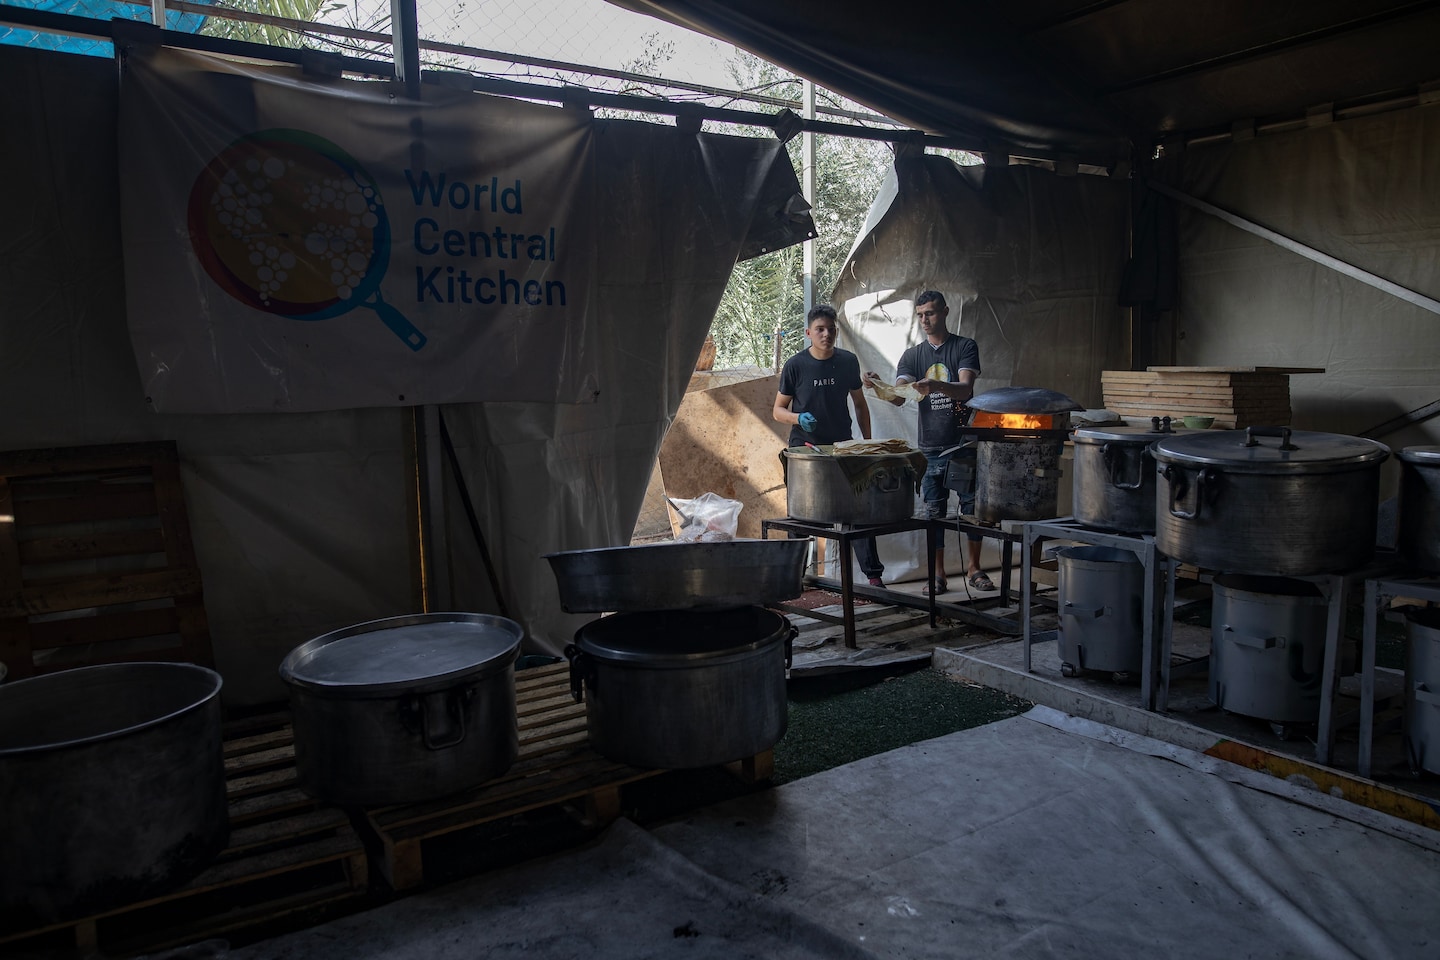 World Central Kitchen employees eliminated by Israeli strike in Gaza, José Andrés states